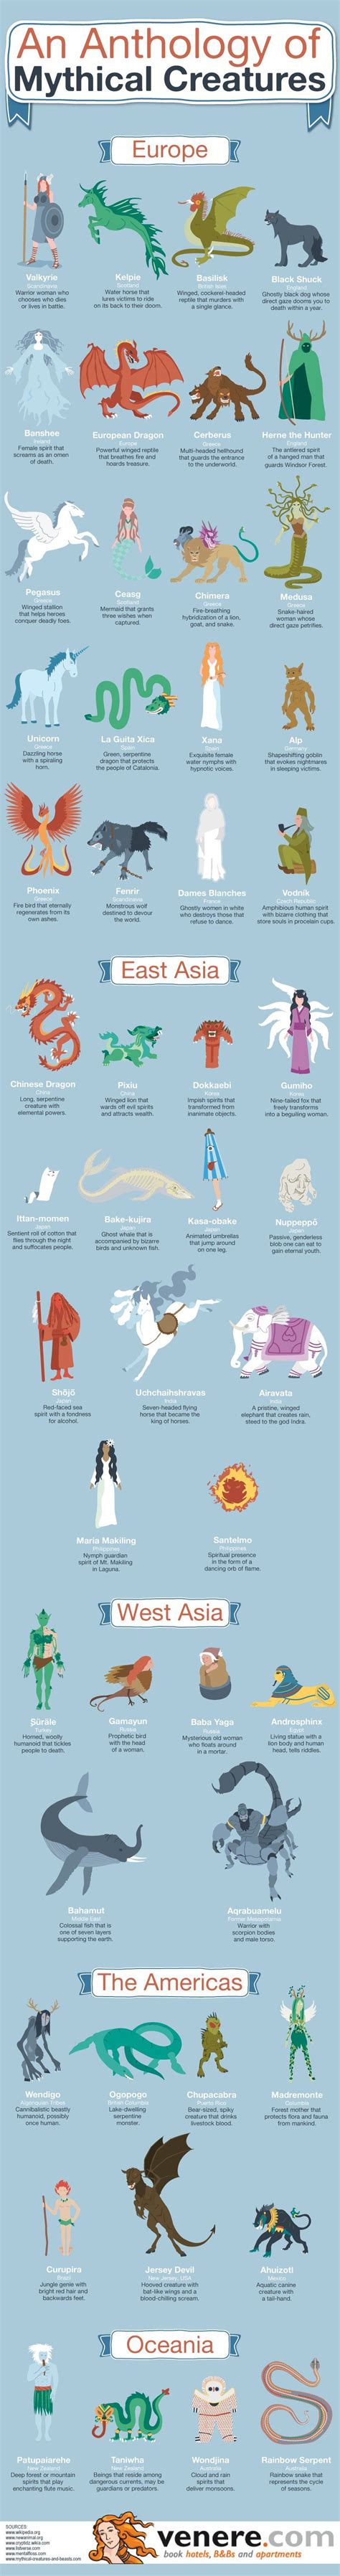 Infographic Mythical Creatures From Around The World Mythological